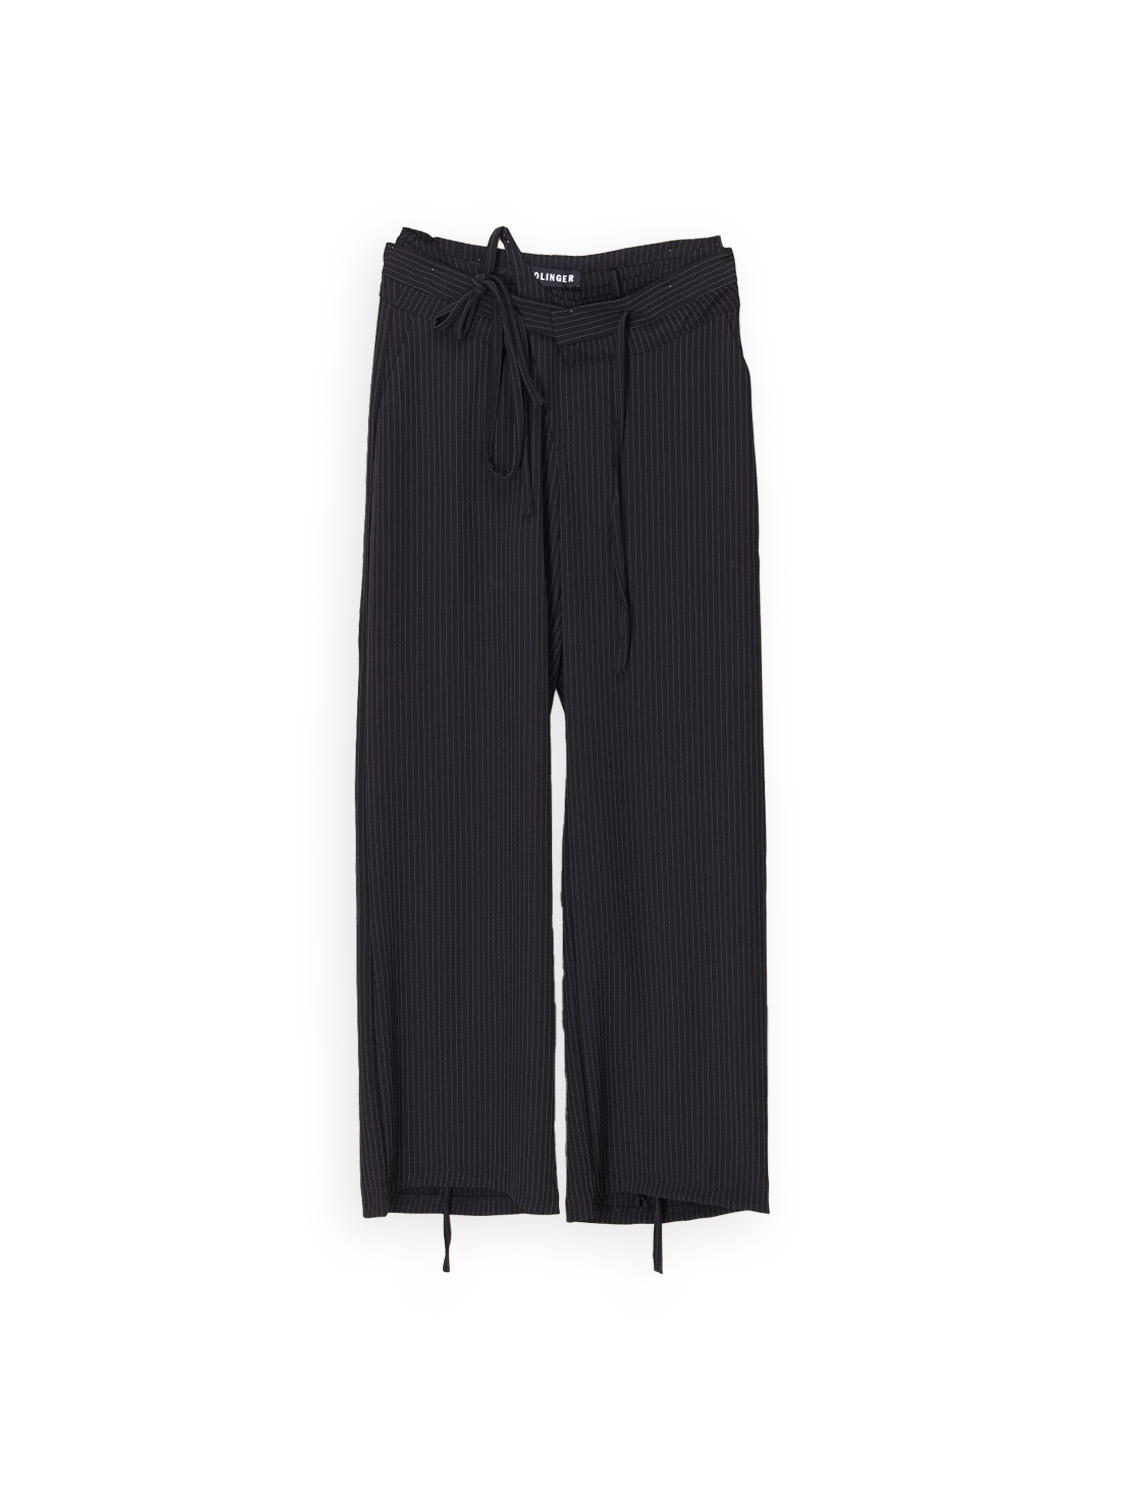 Double Fold Suit - Oversized pinstripe trousers with drawstring 